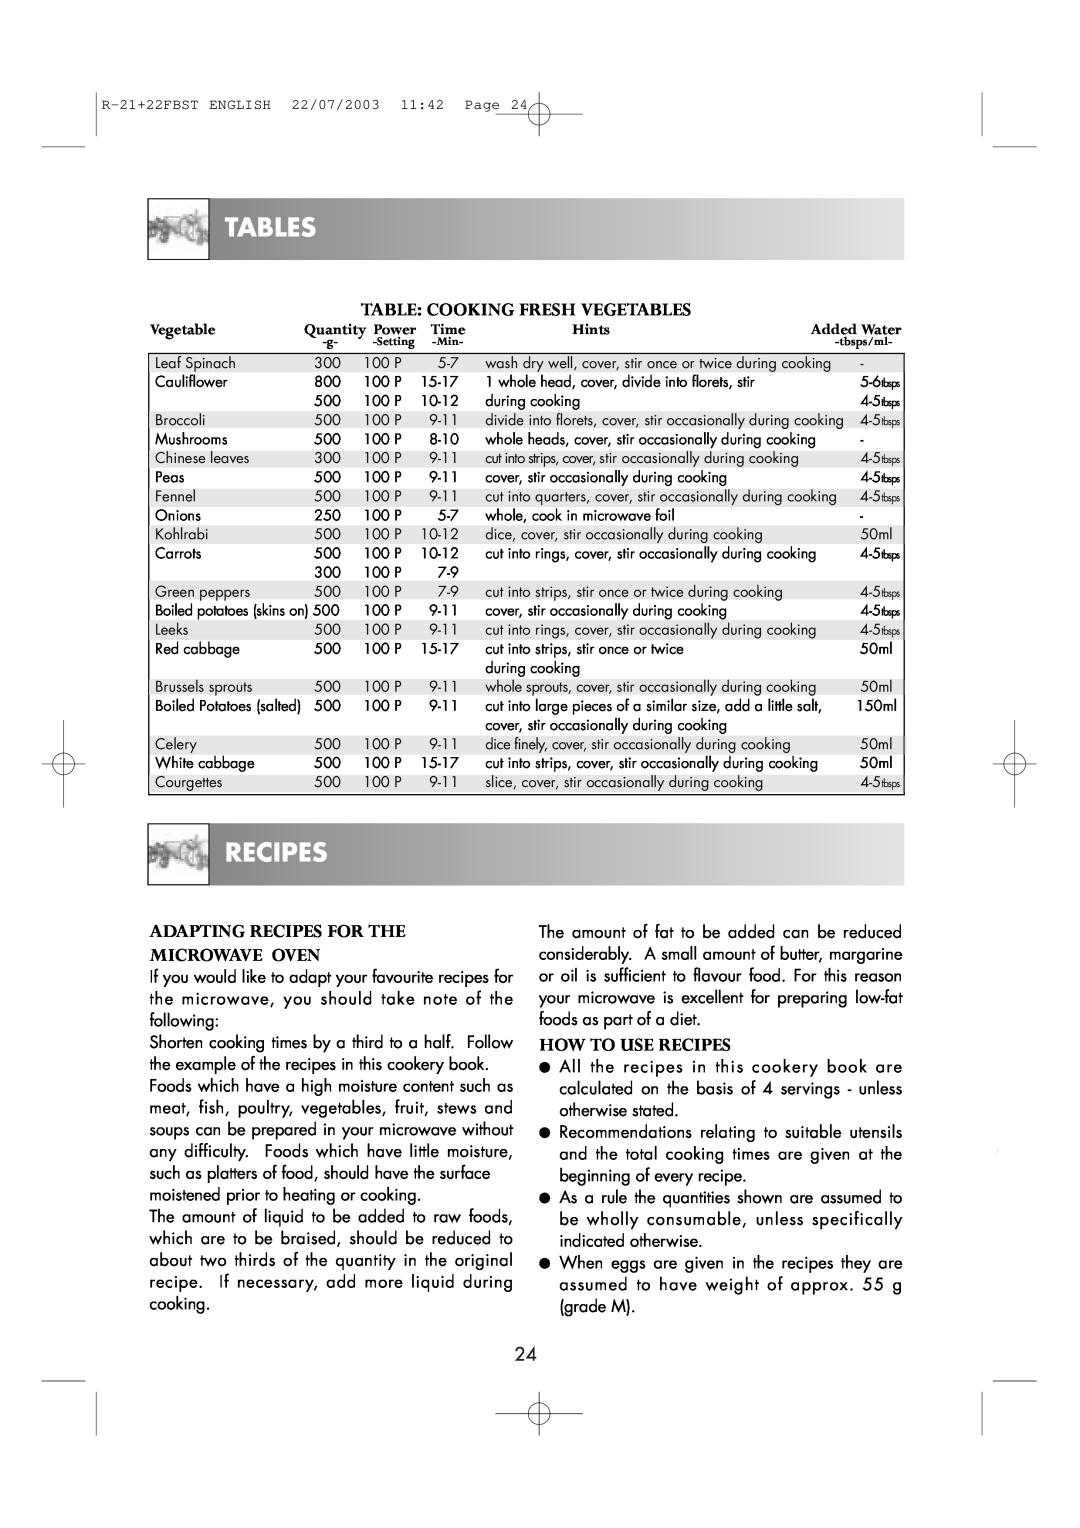 Sharp R-22FBST, R-21 FBST operation manual Recipes, Tables, Vegetable, Quantity Power, Time, Hints, Added Water 